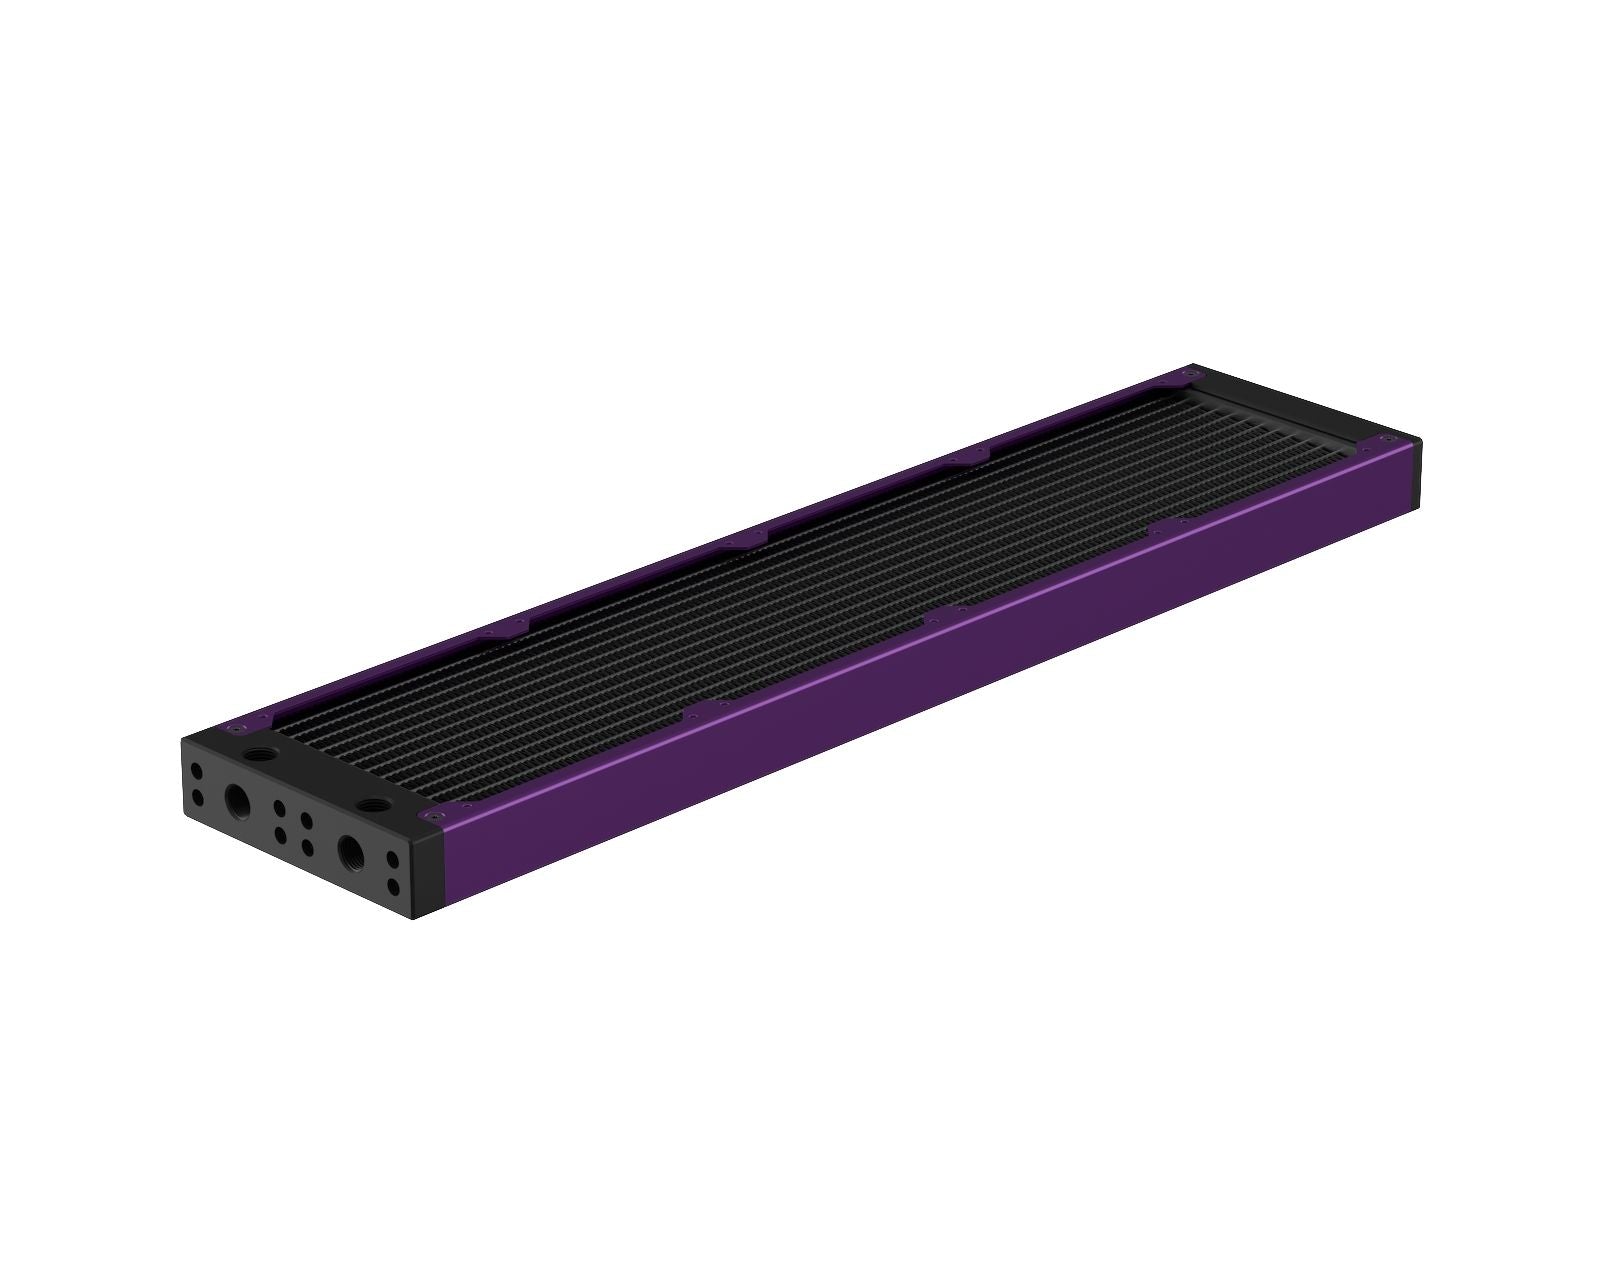 PrimoChill 480SL (30mm) EXIMO Modular Radiator, Black POM, 4x120mm, Quad Fan (R-SL-BK48) Available in 20+ Colors, Assembled in USA and Custom Watercooling Loop Ready - Candy Purple